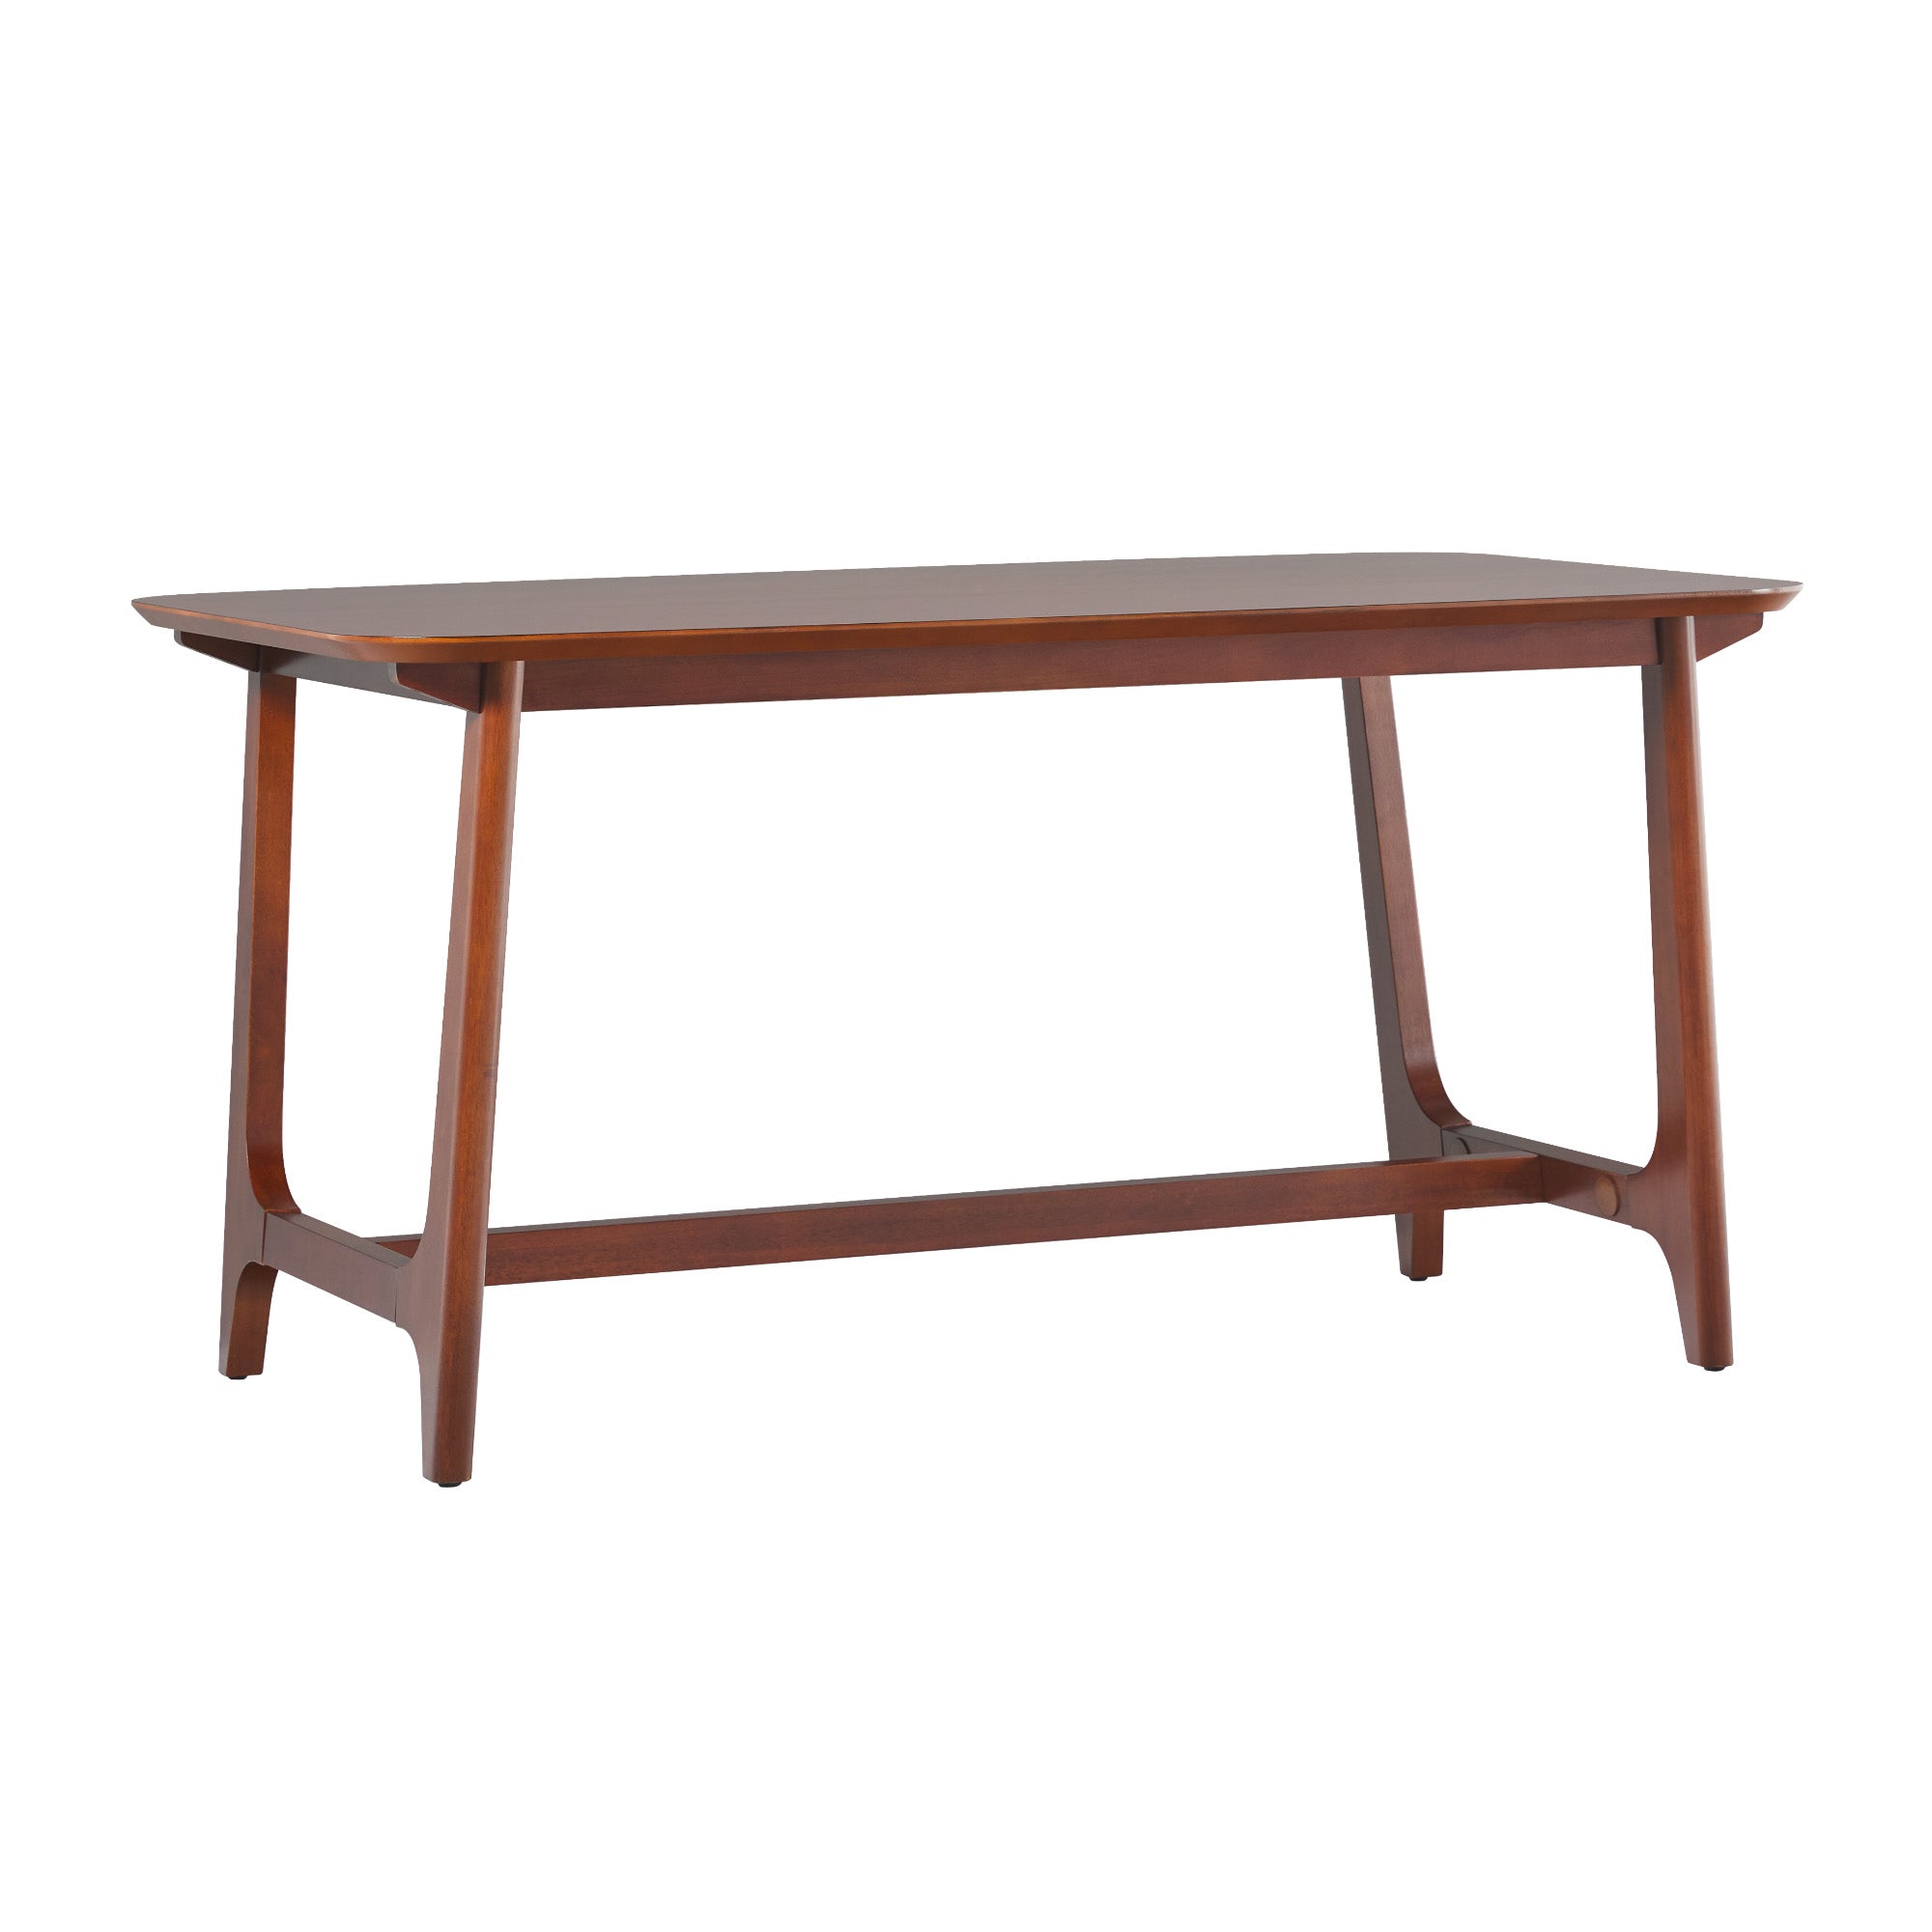 Lunara Dining Table with Trestle Base - Dining Tables